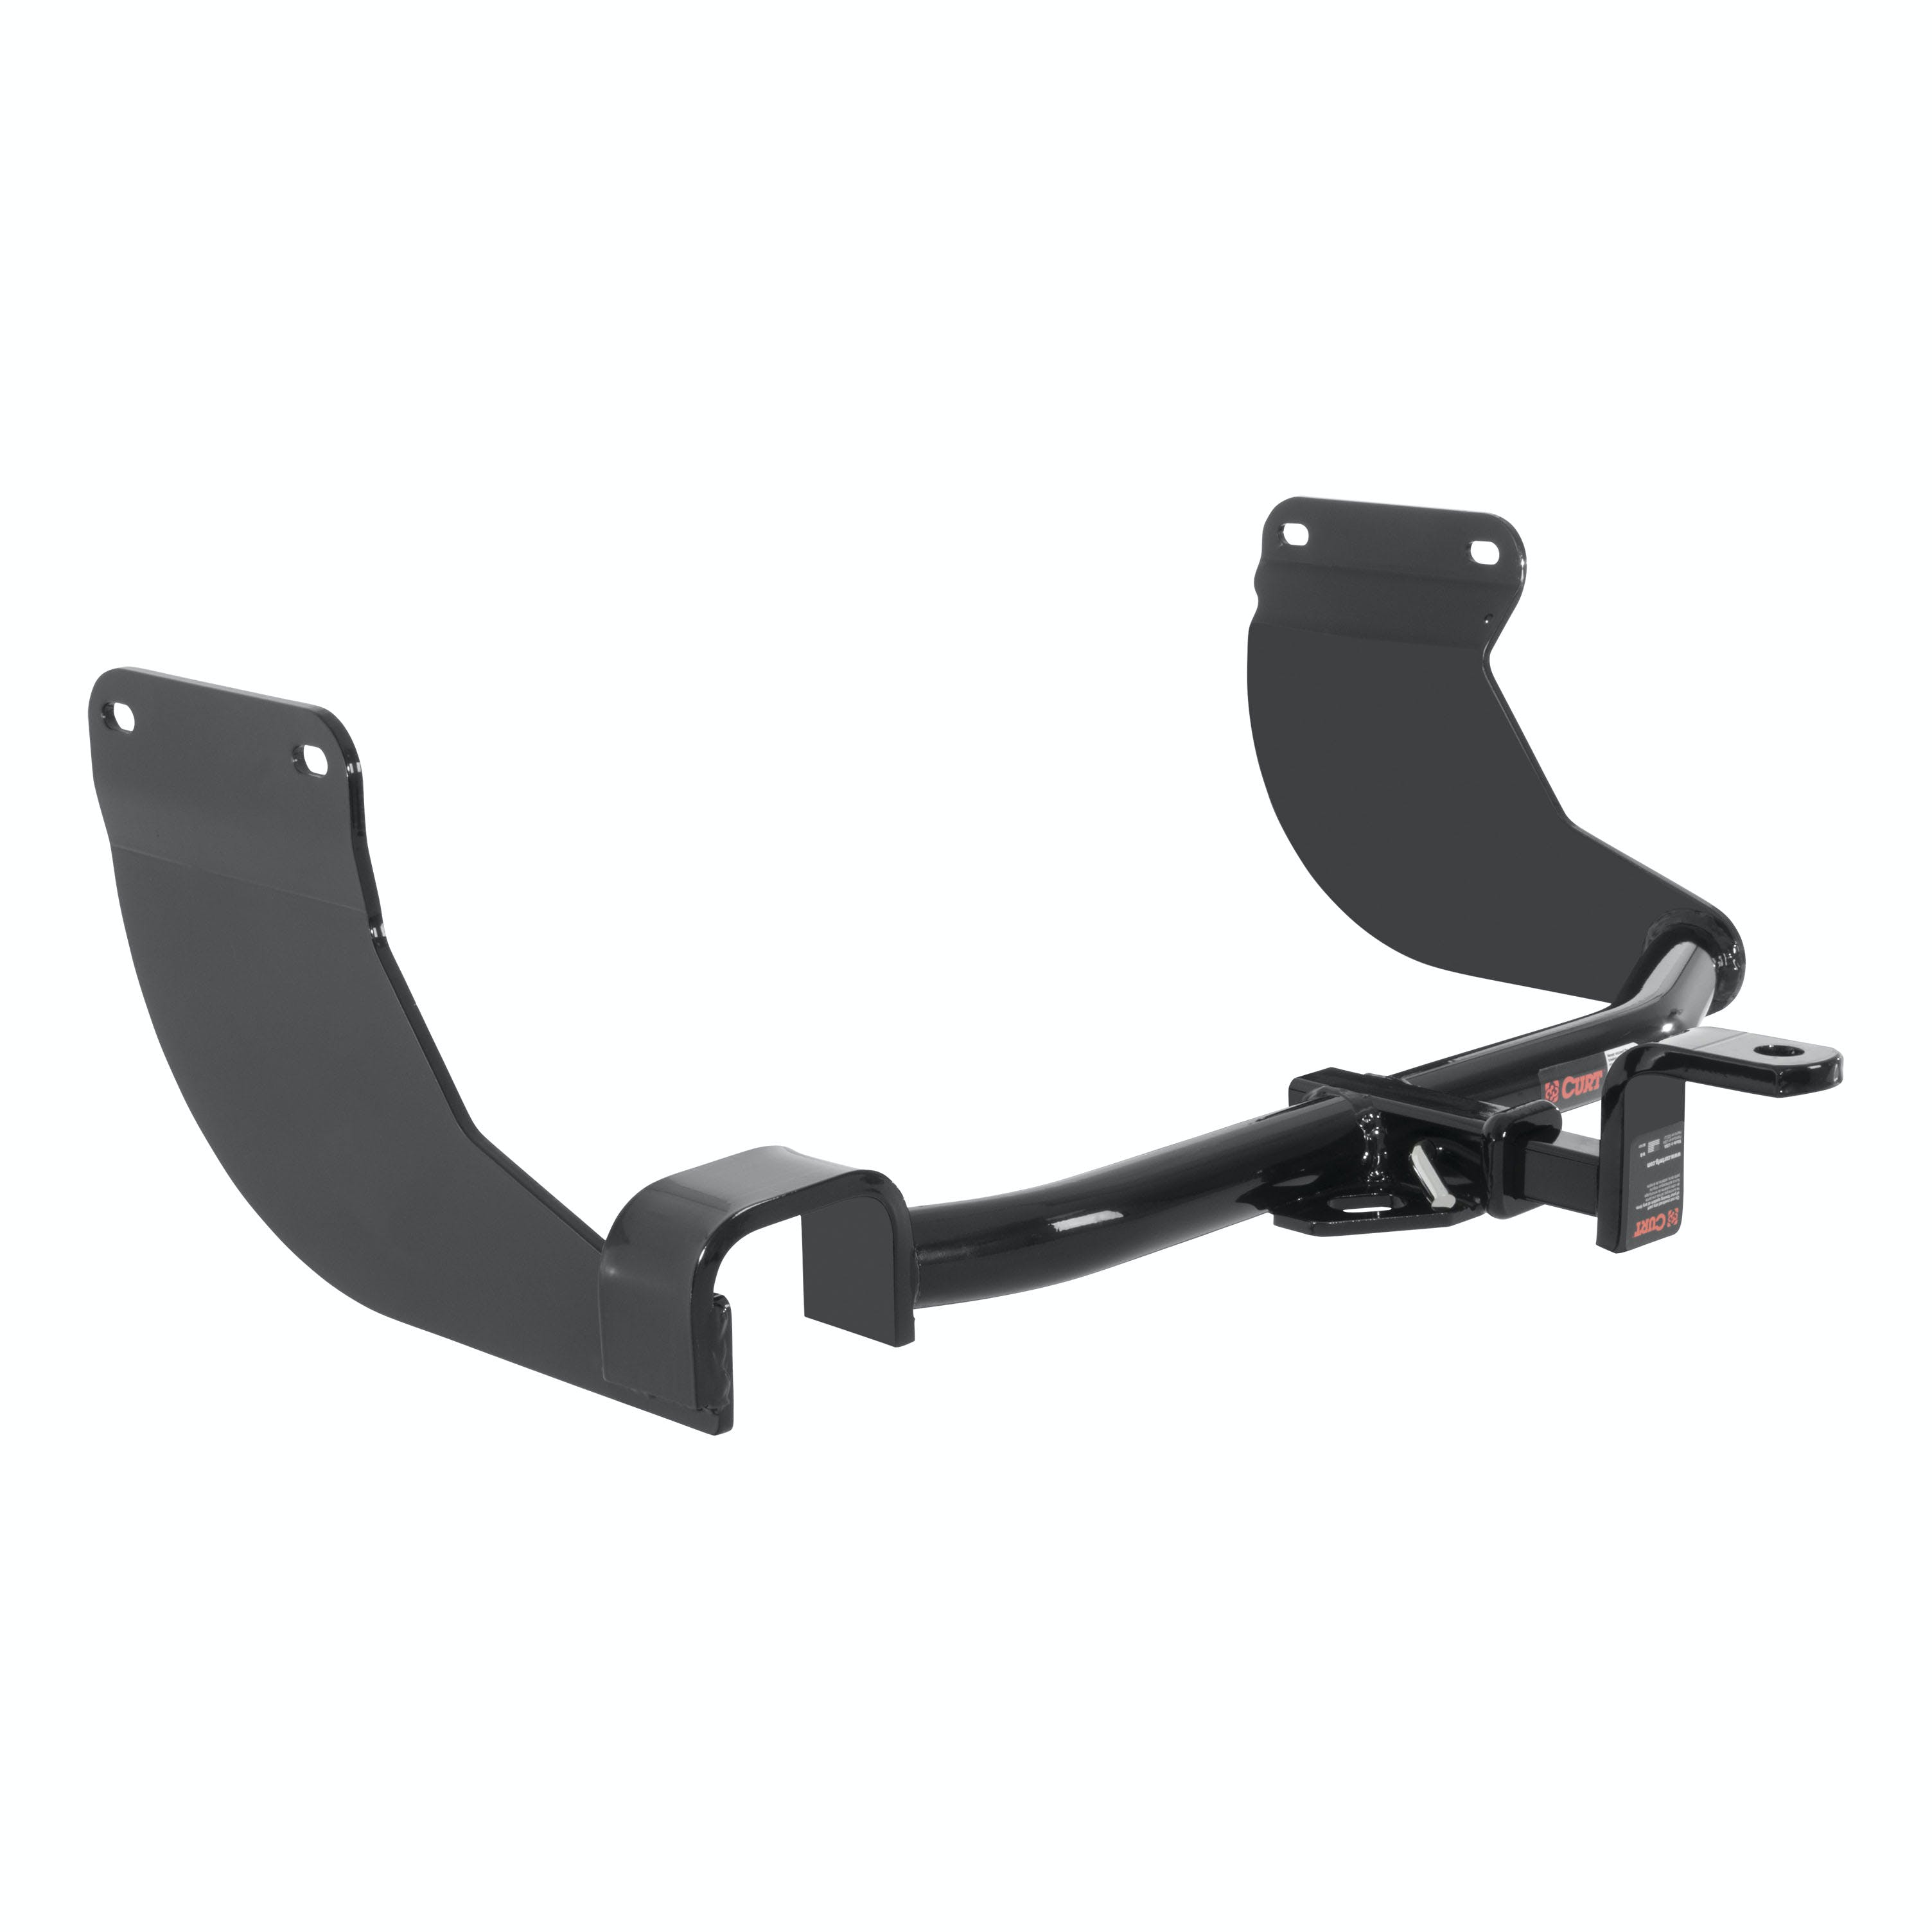 CURT 120763 Class 2 Trailer Hitch, 1-1/4 Ball Mount, Select Ford Transit Connect